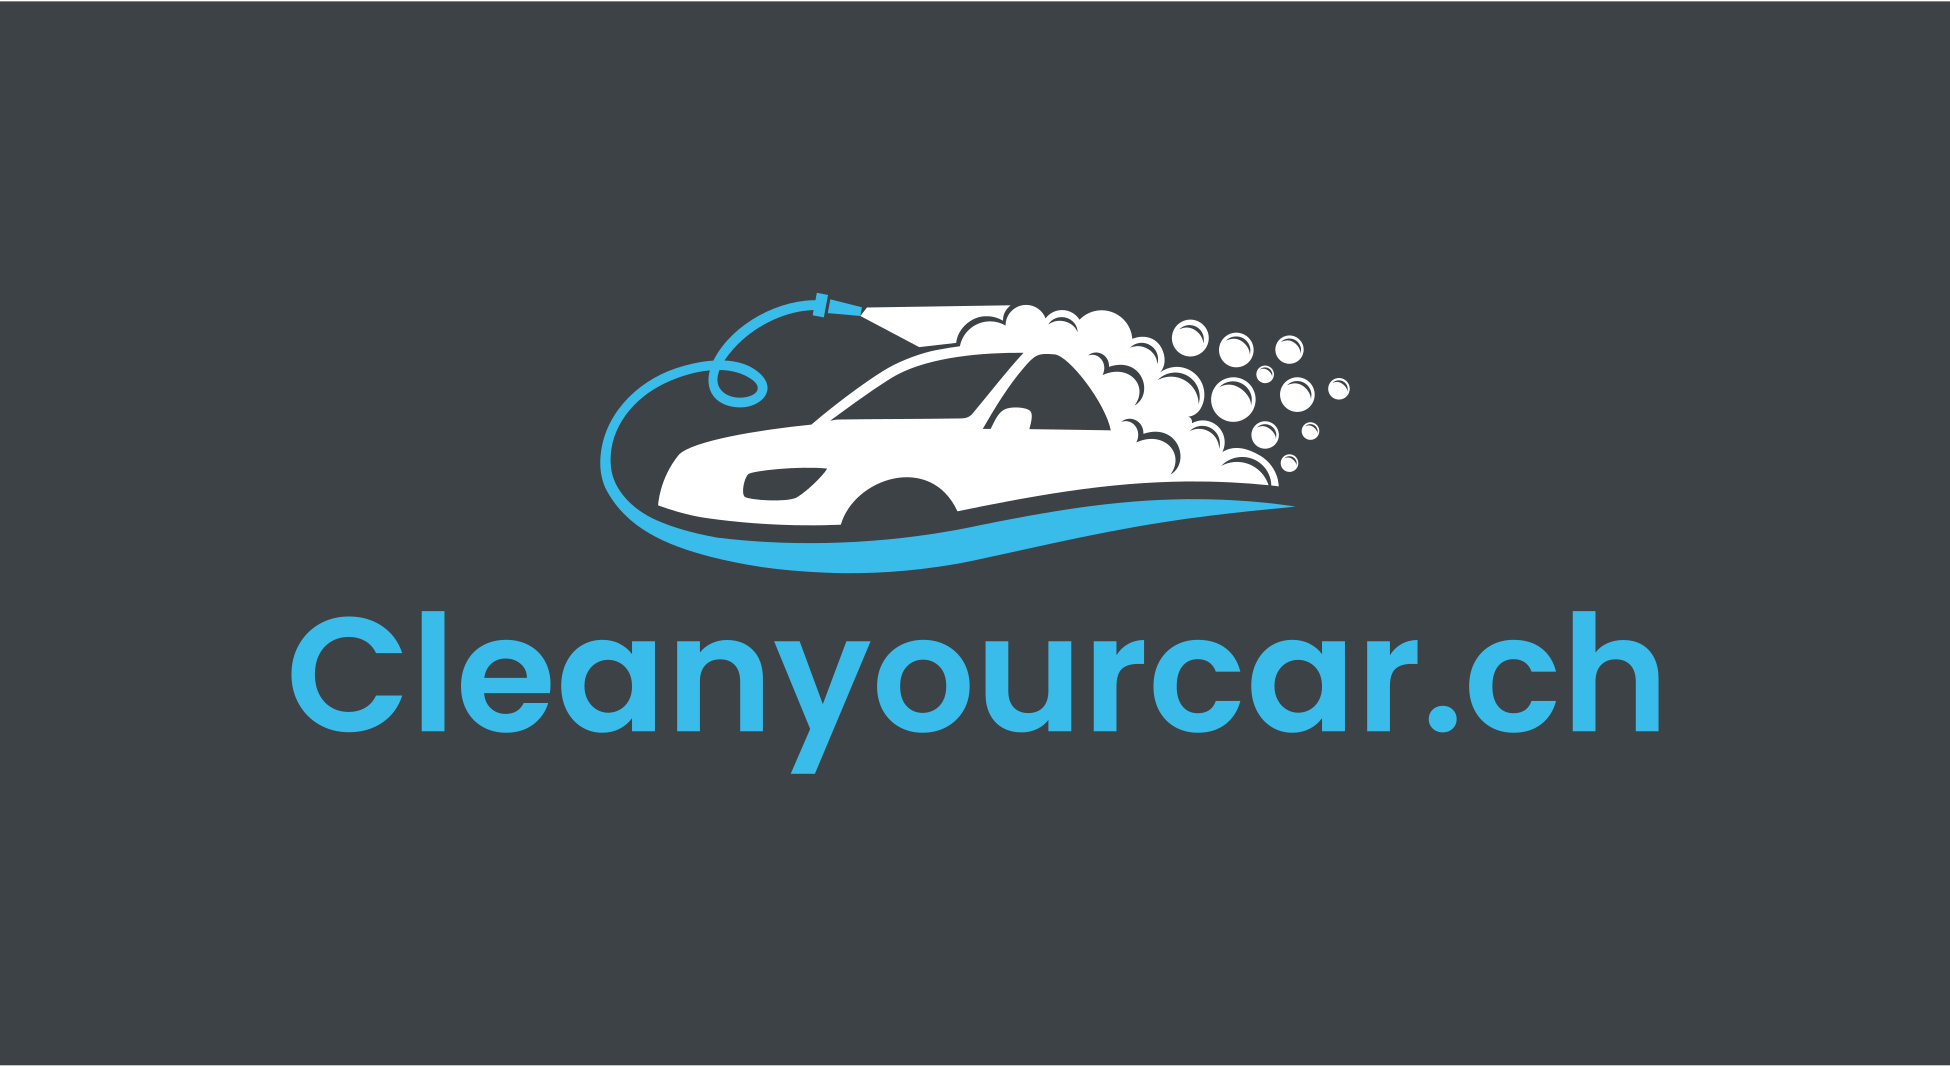 Cleanyourcar.ch